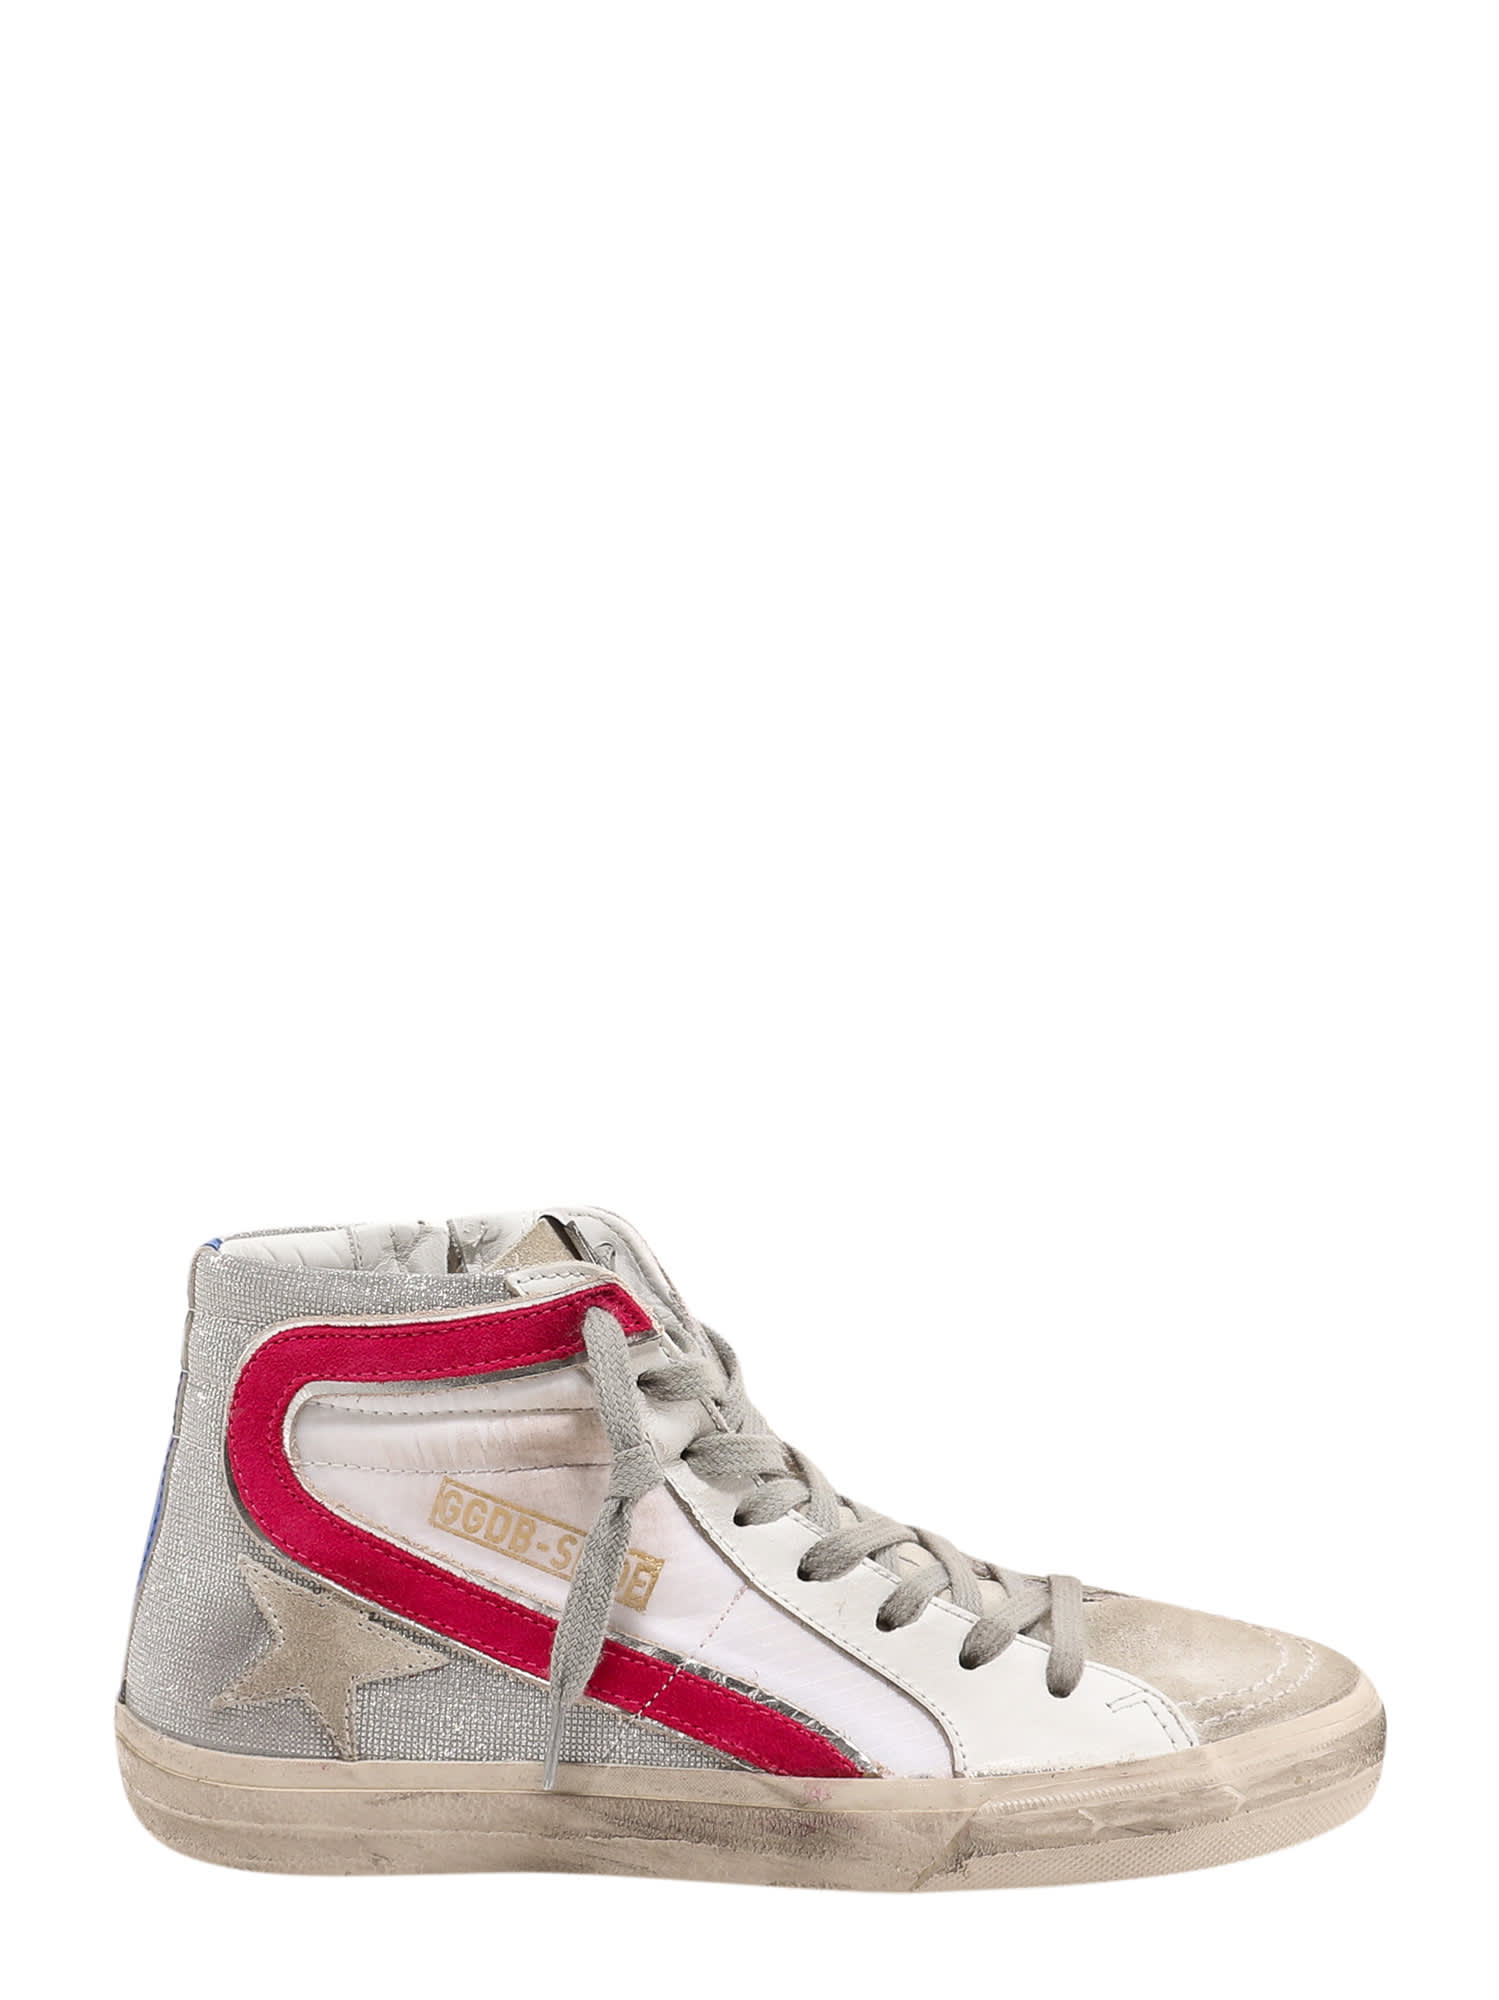 Buy Golden Goose Slide Double Quater Sneakers online, shop Golden Goose shoes with free shipping